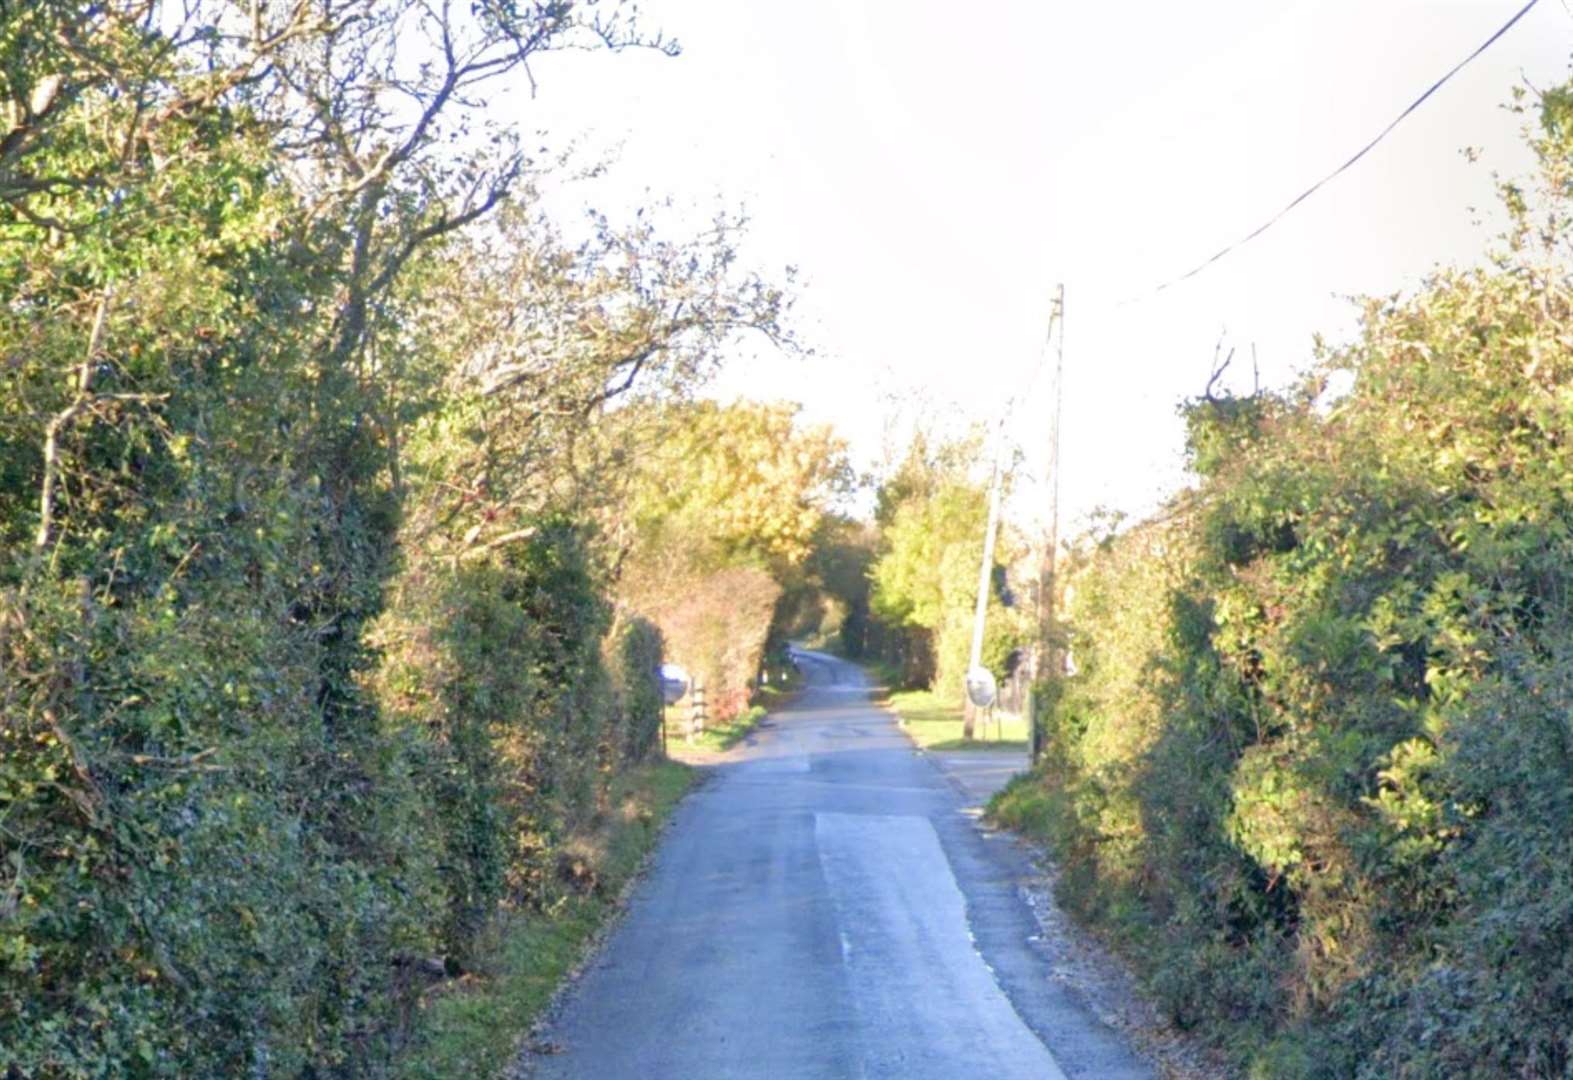 Police were called to an address in Hernhill, near Faversham in November 2020. Picture: Google